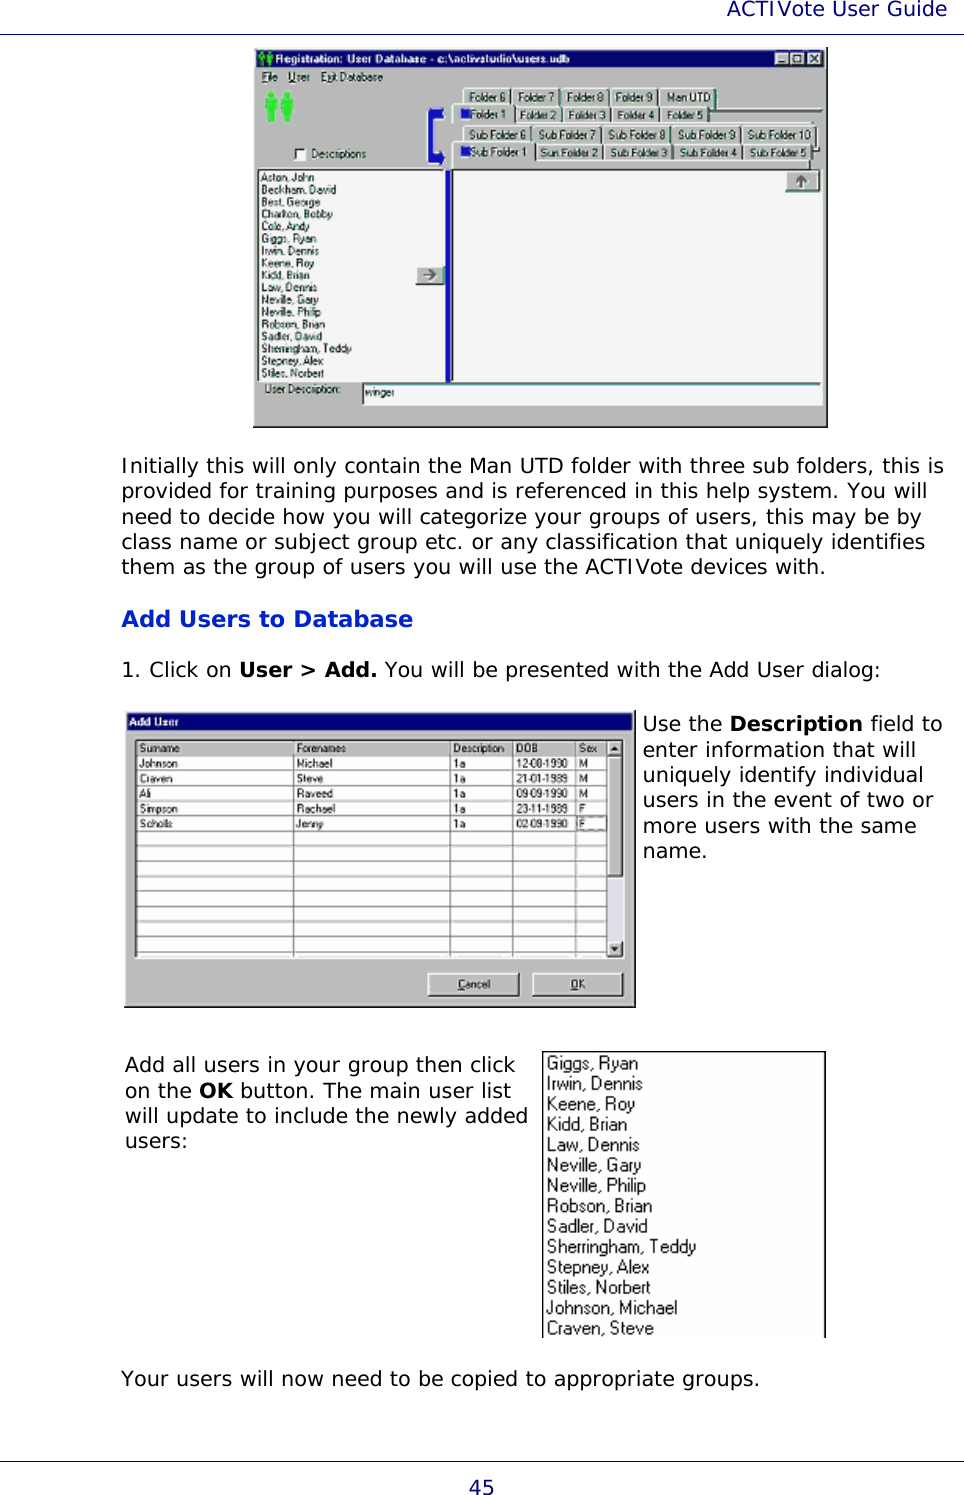 ACTIVote User Guide 45  Initially this will only contain the Man UTD folder with three sub folders, this is provided for training purposes and is referenced in this help system. You will need to decide how you will categorize your groups of users, this may be by class name or subject group etc. or any classification that uniquely identifies them as the group of users you will use the ACTIVote devices with. Add Users to Database 1. Click on User &gt; Add. You will be presented with the Add User dialog:  Use the Description field to enter information that will uniquely identify individual users in the event of two or more users with the same name. Add all users in your group then click on the OK button. The main user list will update to include the newly added users:  Your users will now need to be copied to appropriate groups. 